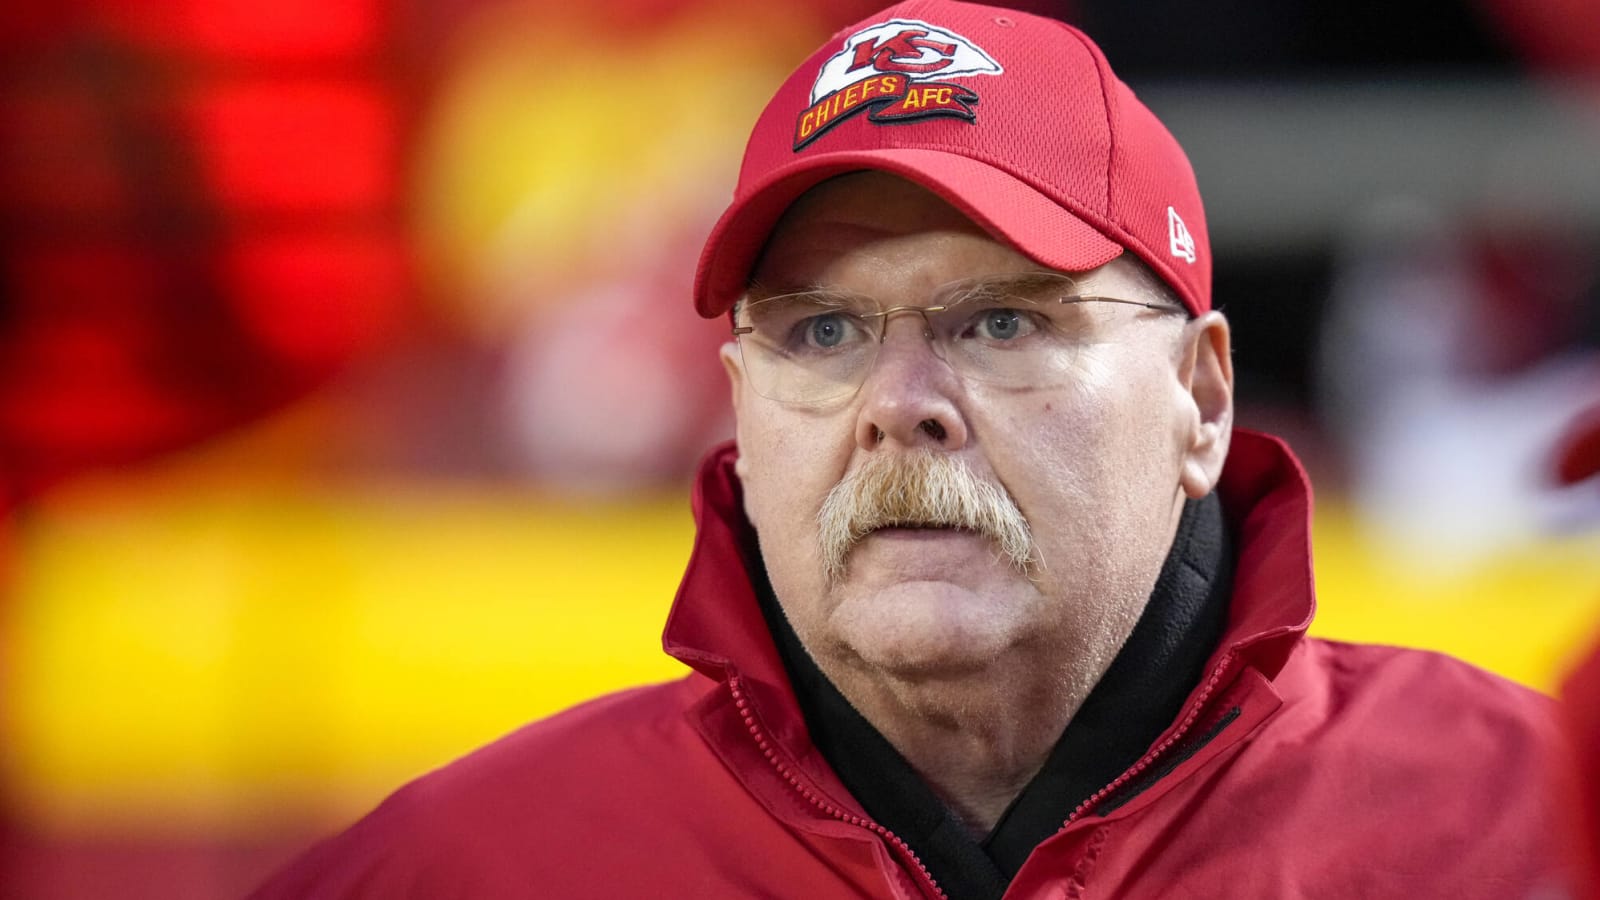 Chiefs HC Andy Reid comments on facing his old team in the Super Bowl